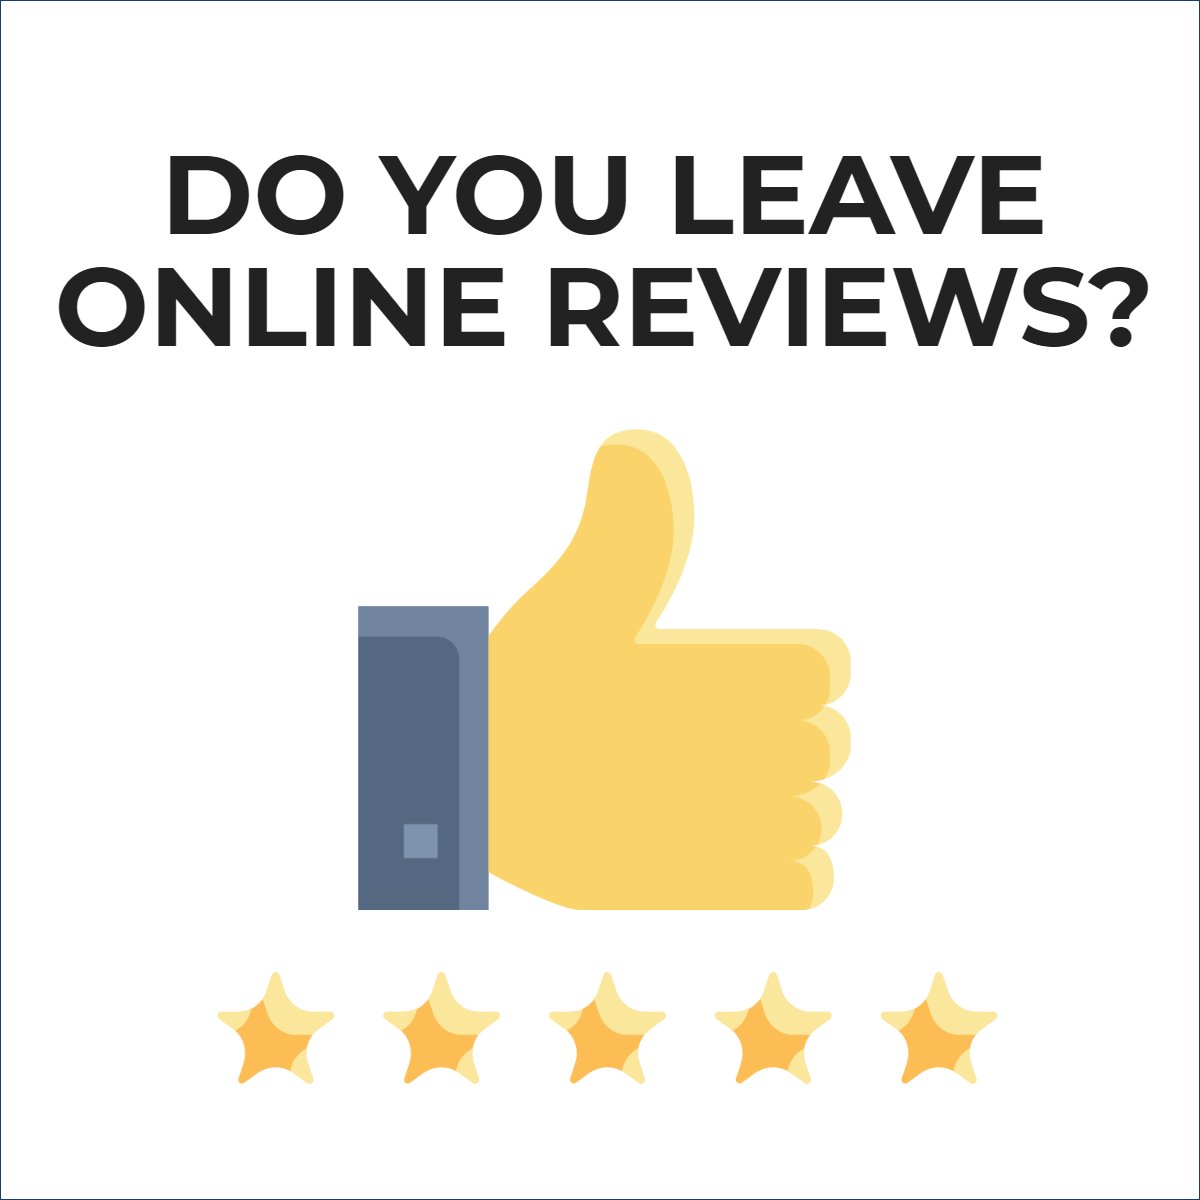 Did you know that 90% of consumers read online reviews before visiting a business? 😉

#onlinereviews #onlinereviewsmatter #realestate #realestatecoach #digitalmarketing #reviews #reputation 
 #lasvegasrealtor #lasvegasrealestate #sparrowsells #lasvegashomes #realestate